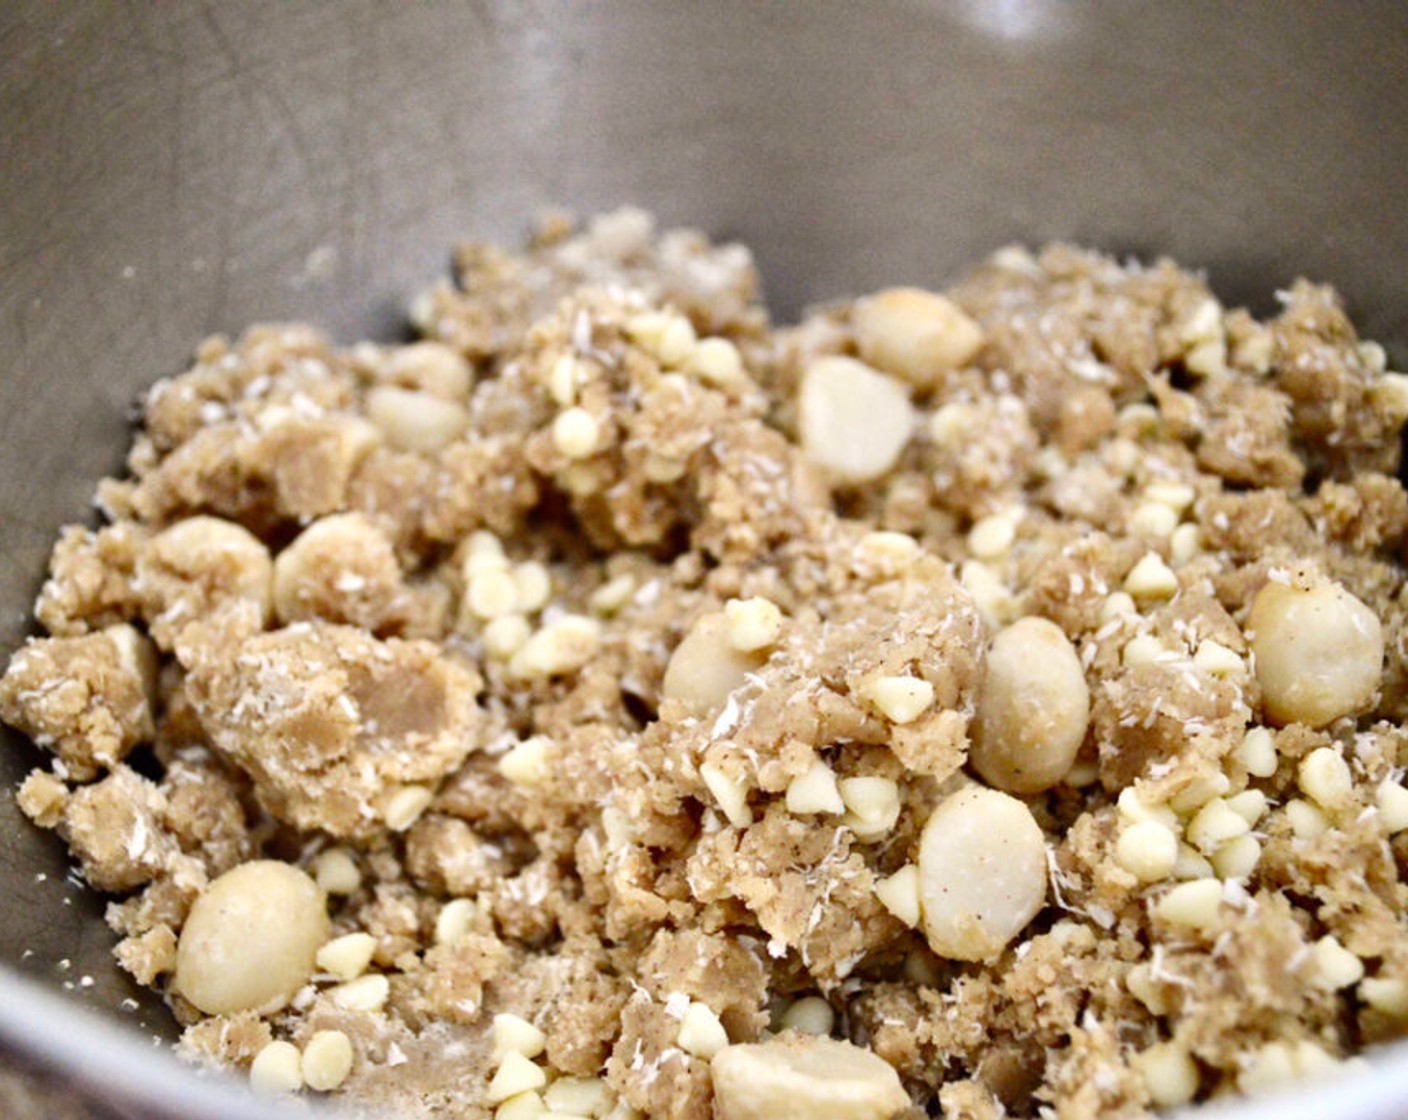 step 6 Turn off the mixer and switch to a spatula to thoroughly fold in the White Chocolate Chips (1 cup), Macadamia Nuts (1 cup), and Unsweetened Shredded Coconut (1/2 cup). Set the bowl of dough in the refrigerator to chill for 2 hours.